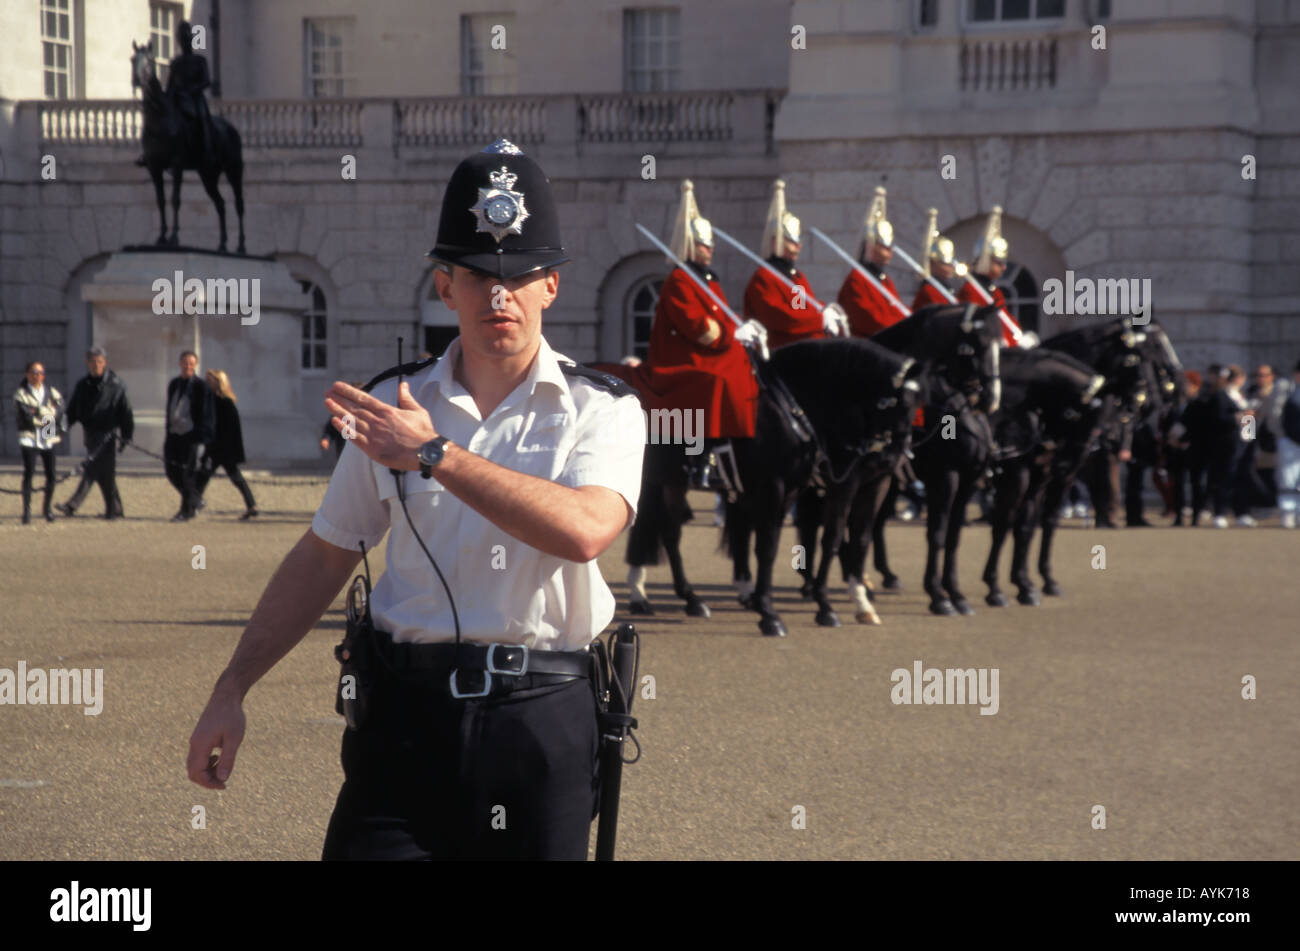 London Horse Guards Household Cavalry Mounted Regiment The Life Guards changing guard policeman directing tourists Stock Photo